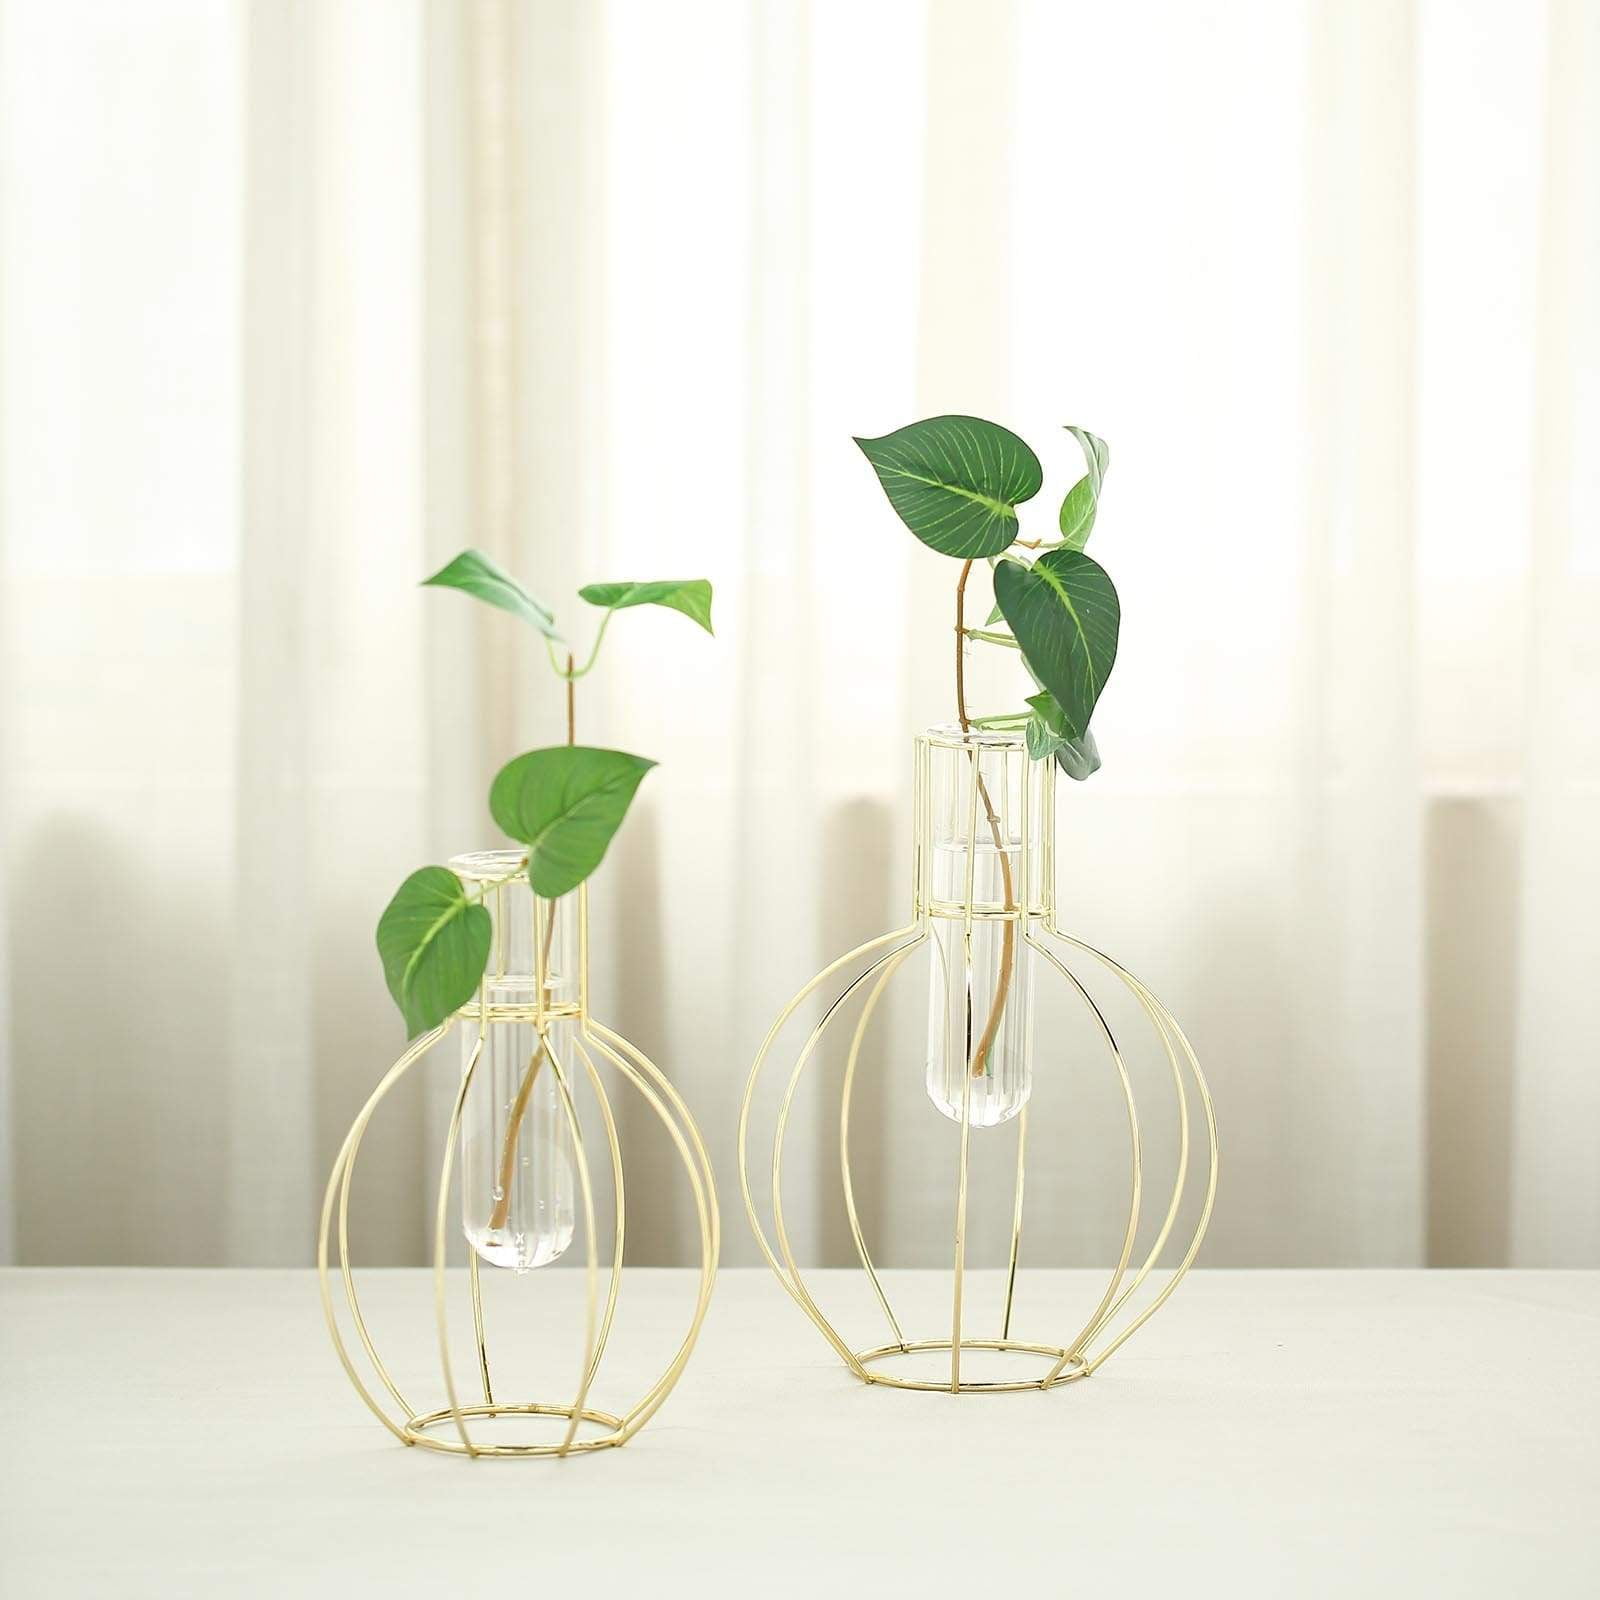 2 GOLD Geometric Flower Vase Holders with Clear Glass Tubes Wedding Centerpieces 